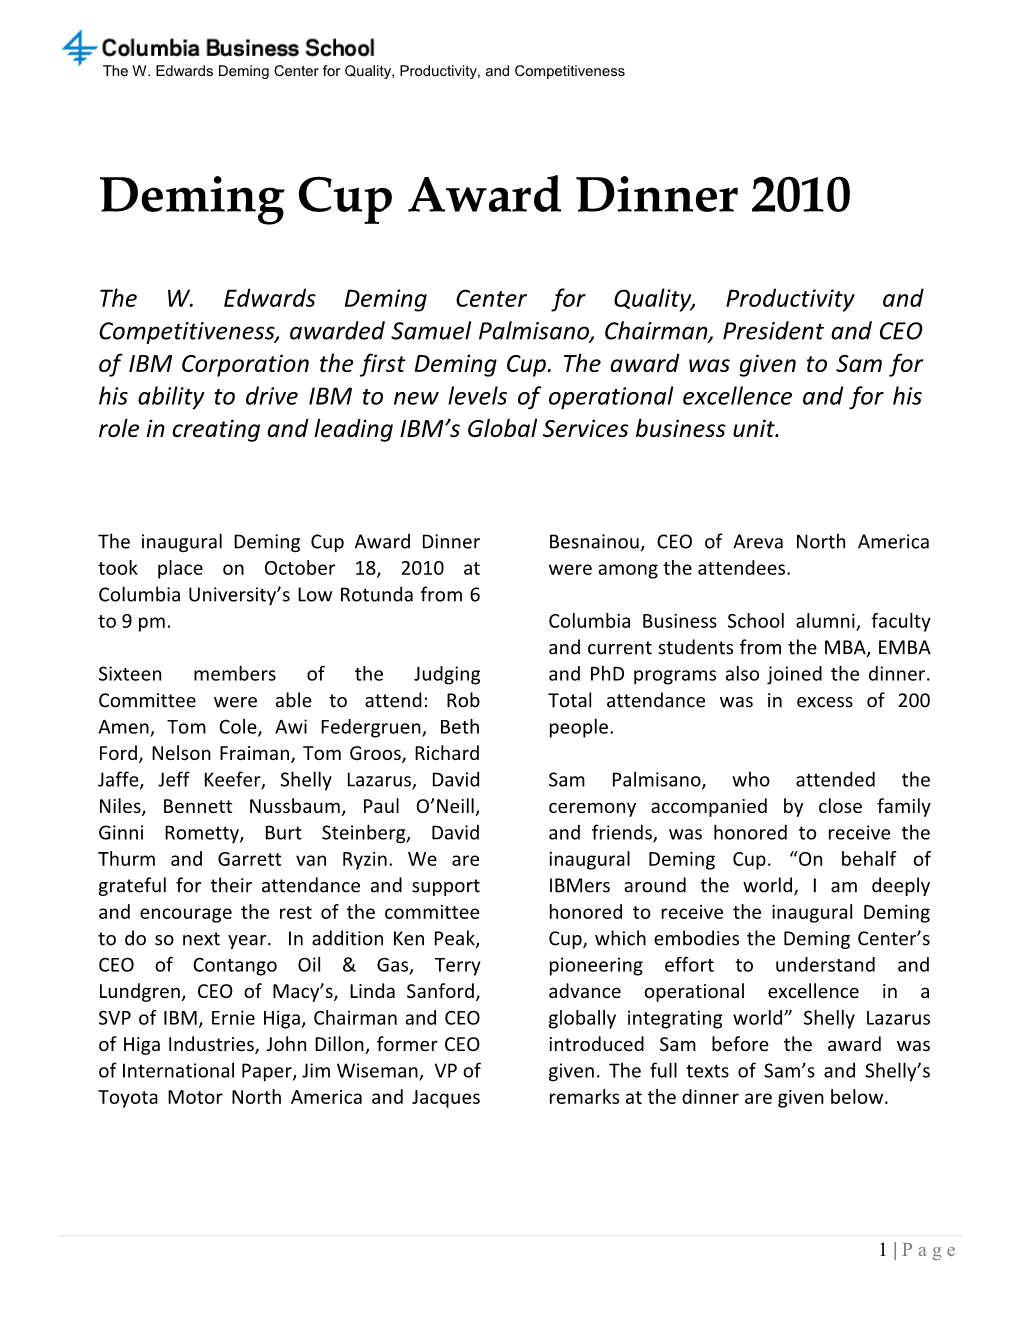 Download the Deming Cup Award